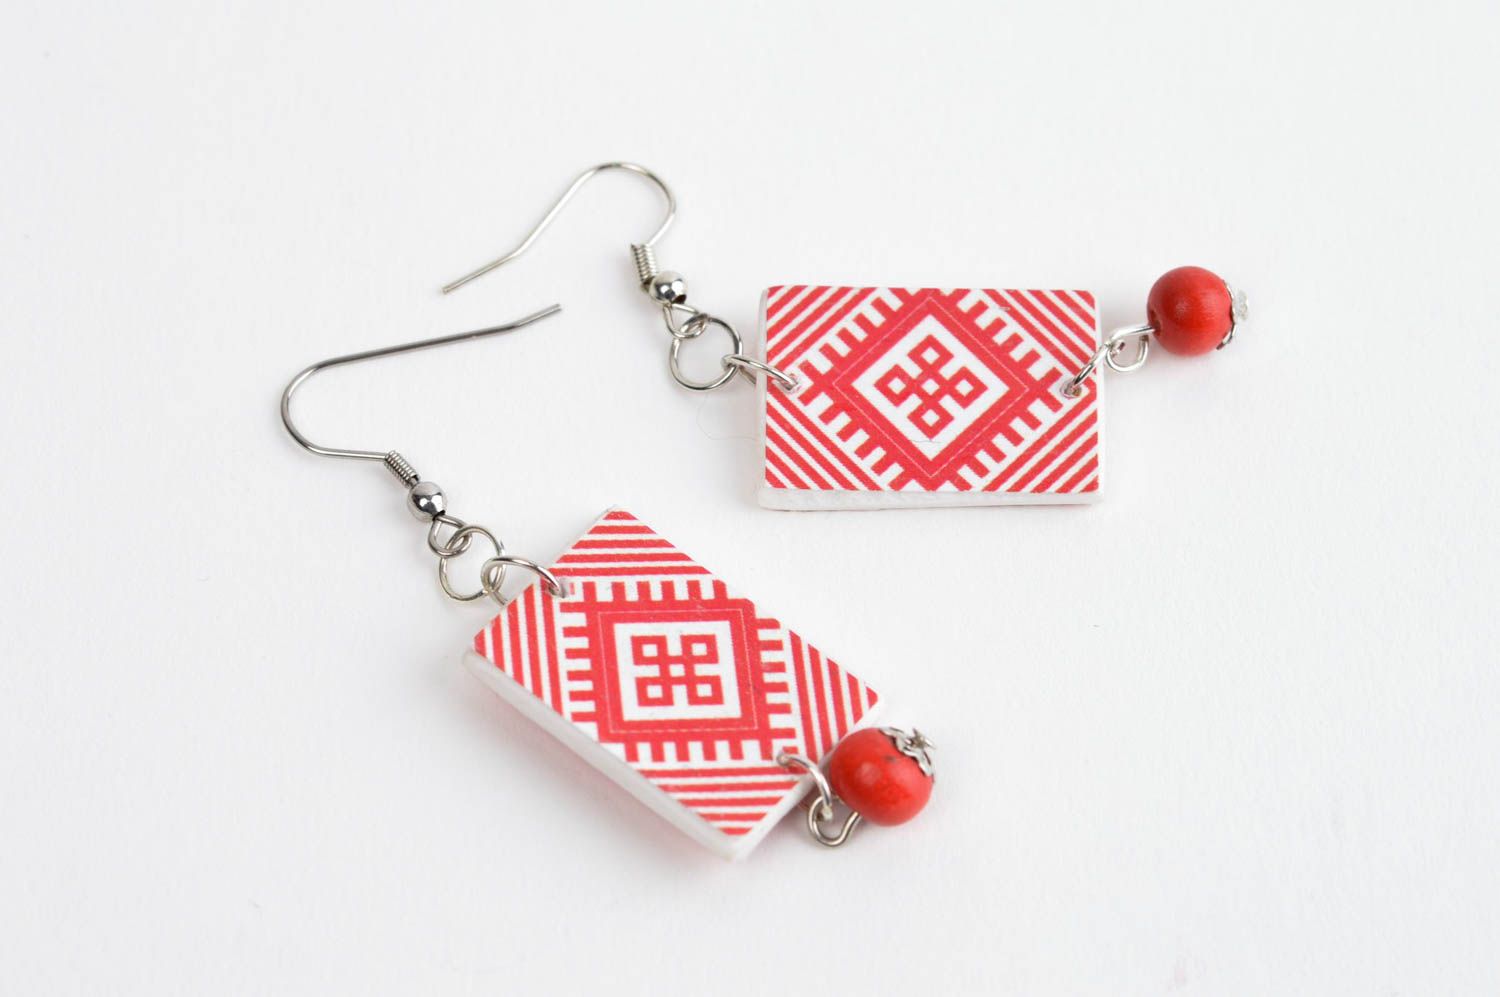 Unusual handmade wooden earrings accessories for girls fashion trends gift ideas photo 3